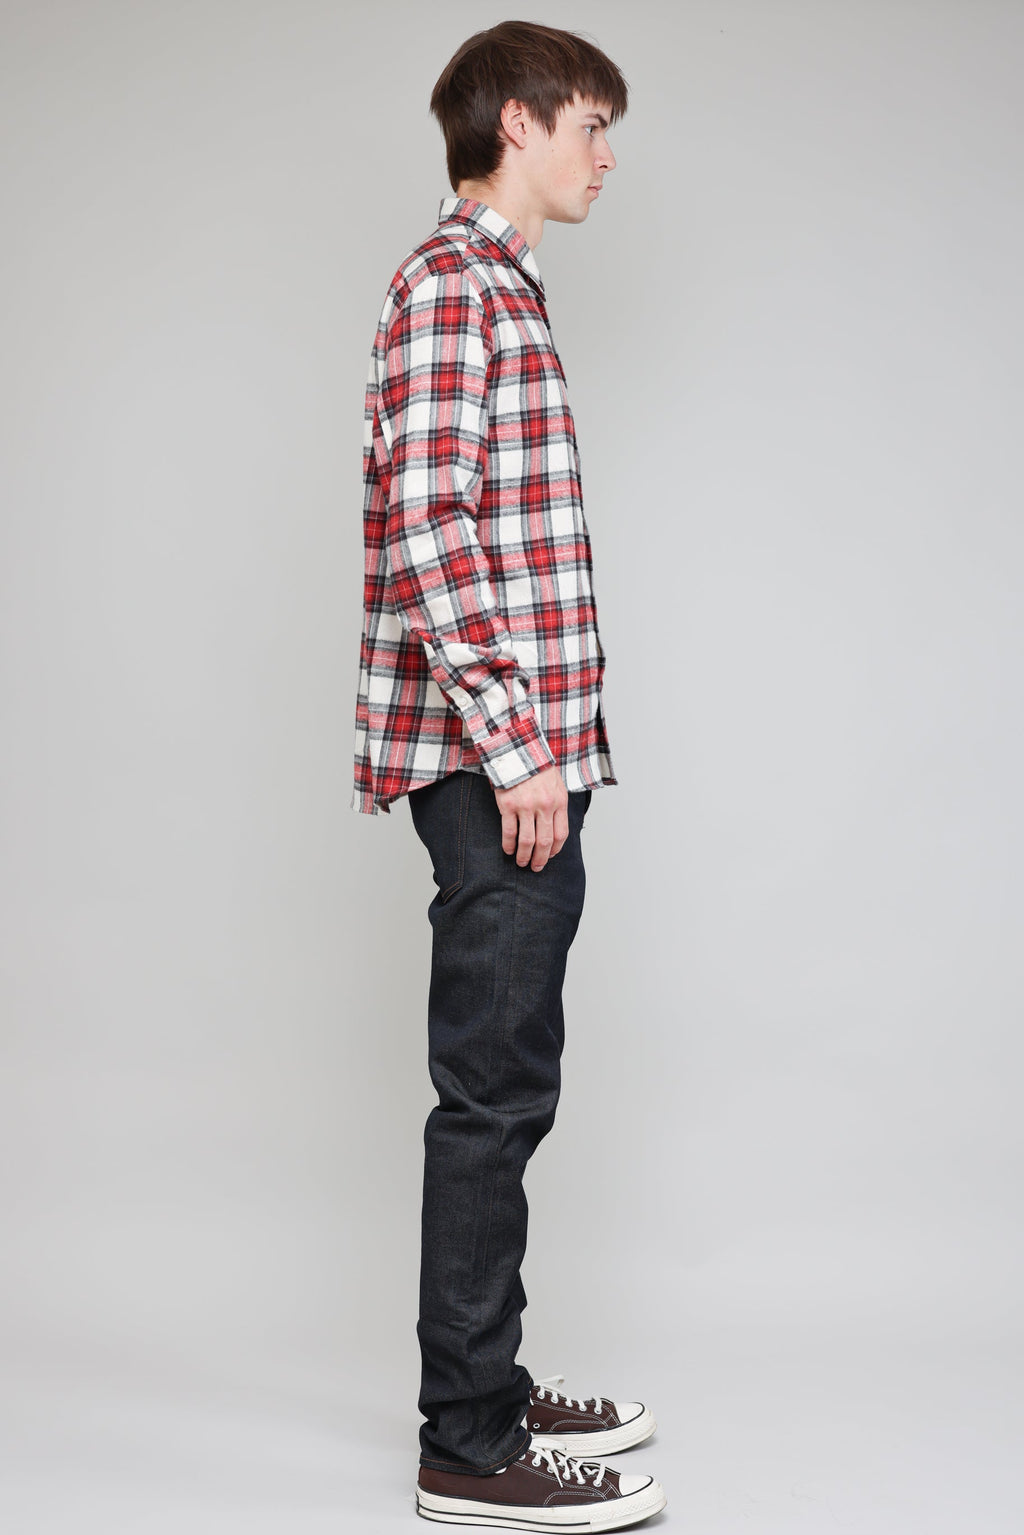 Japanese Shaggy Tartan in Red and Grey 04